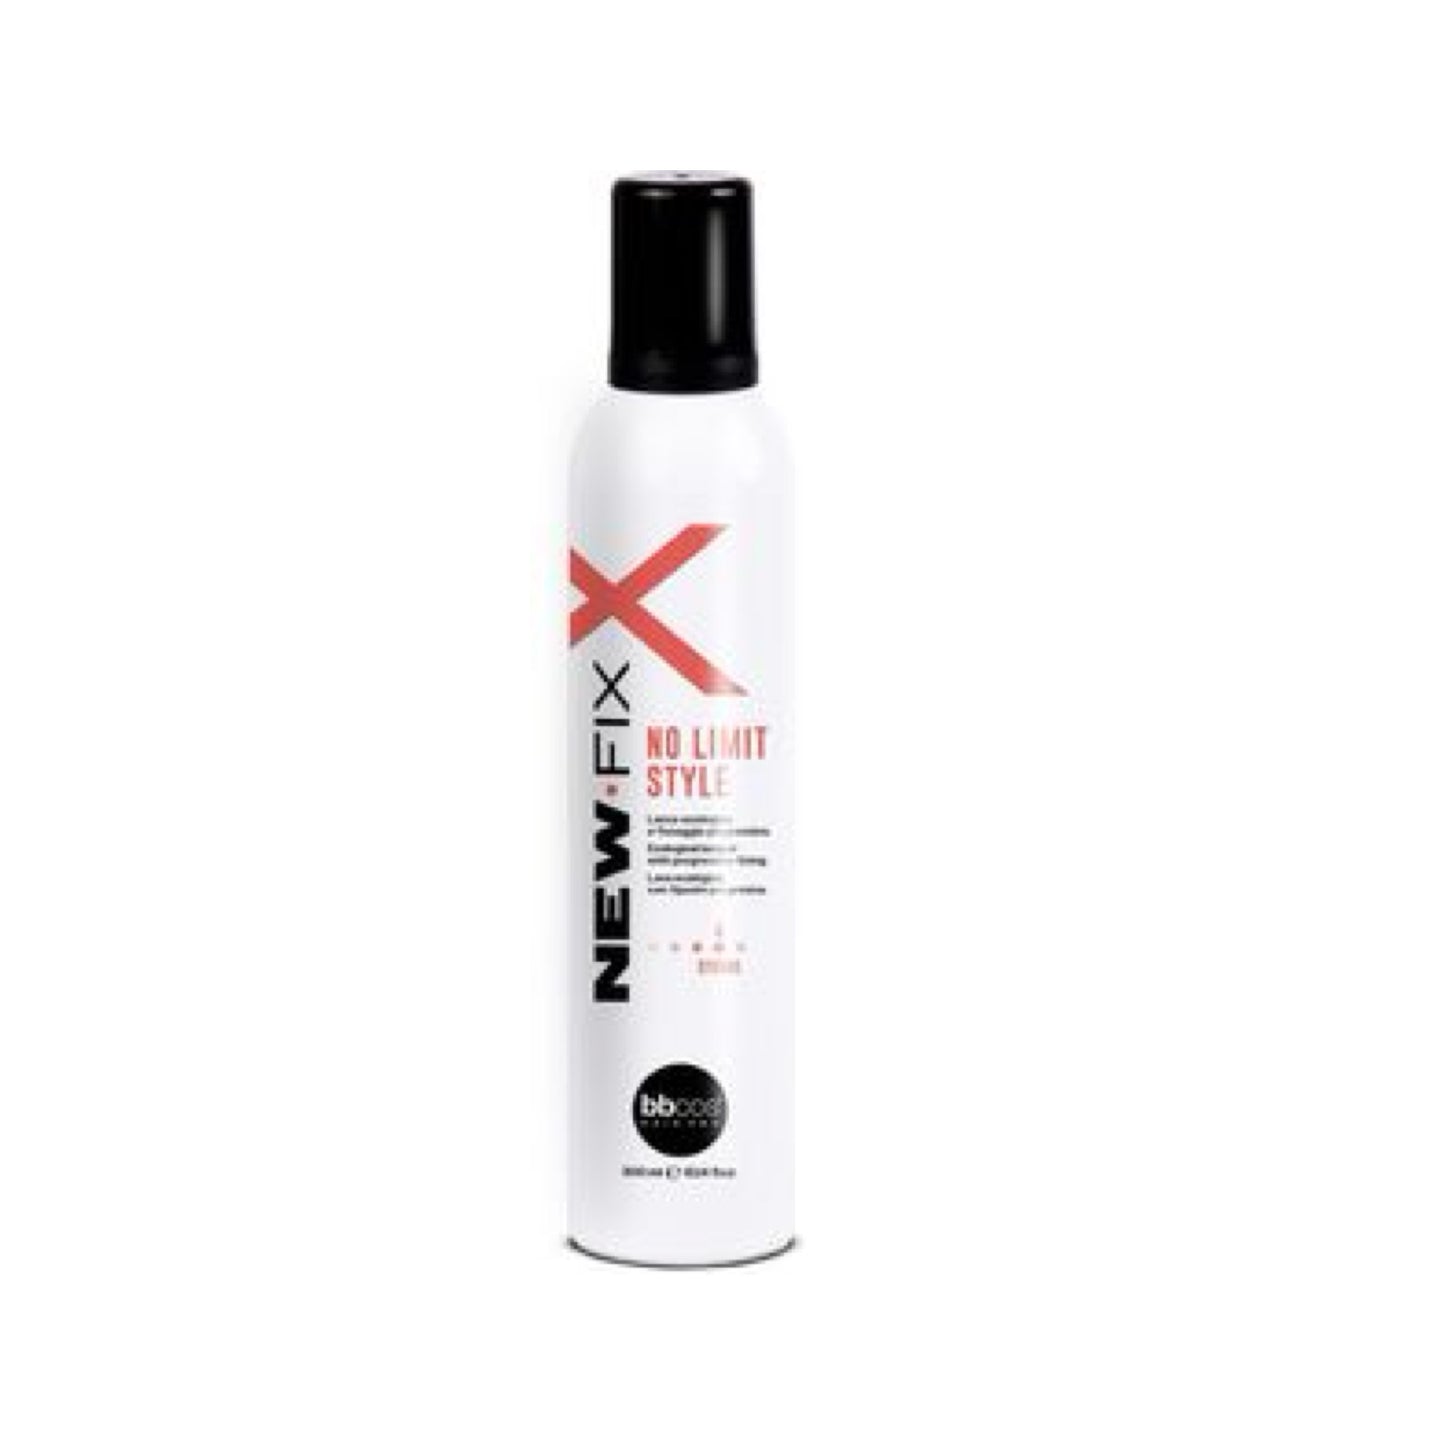 MHP - BBCOS New Fix No Limit Style Ecological Lacquer (300ml